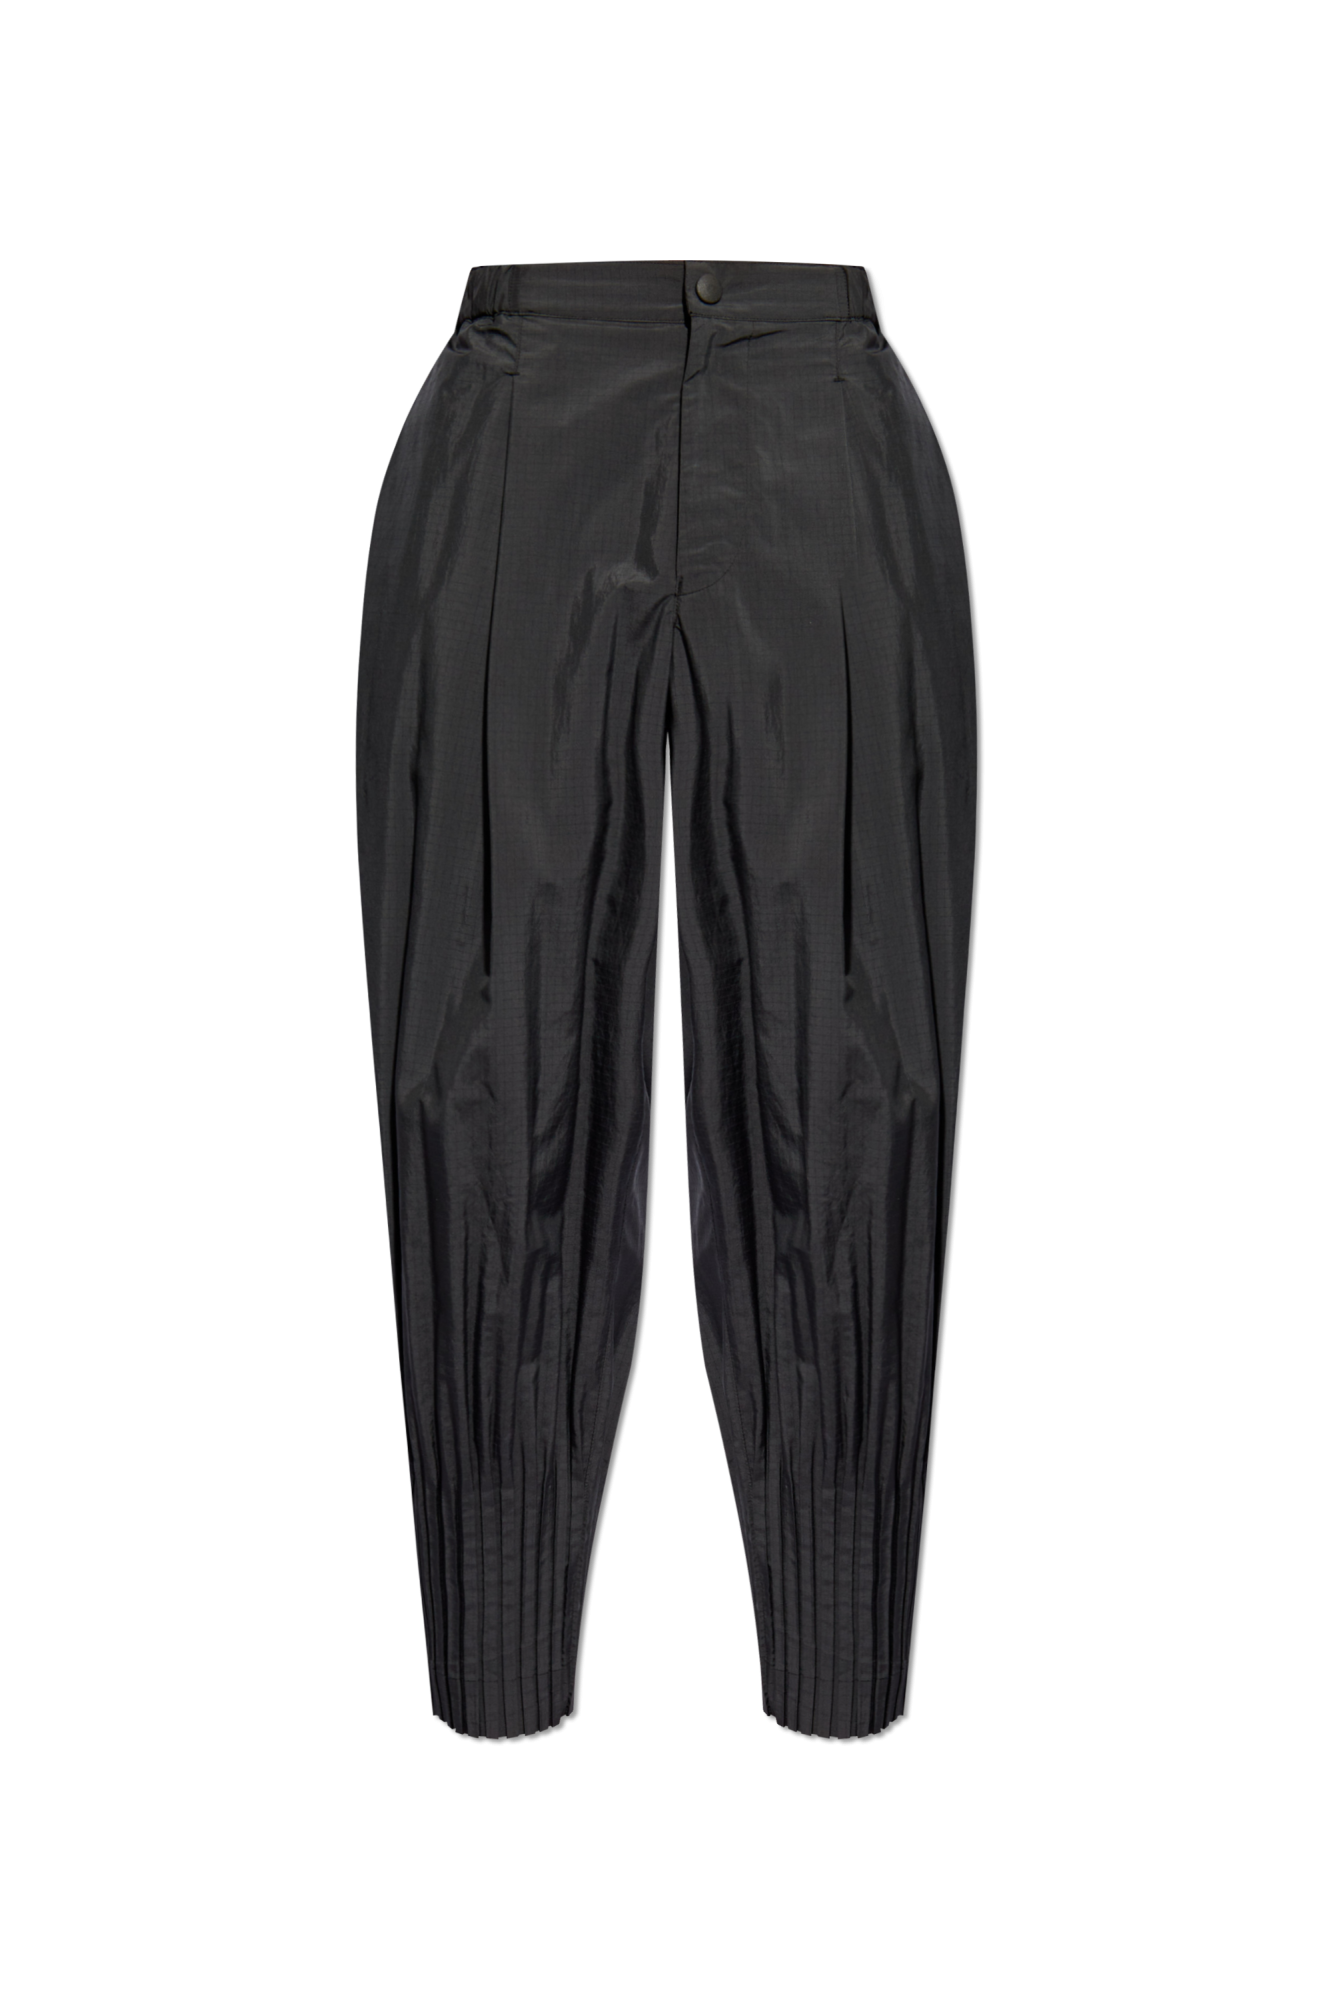 Issey Miyake Homme Plisse Nylon Trousers by Issey Miyake Homme 